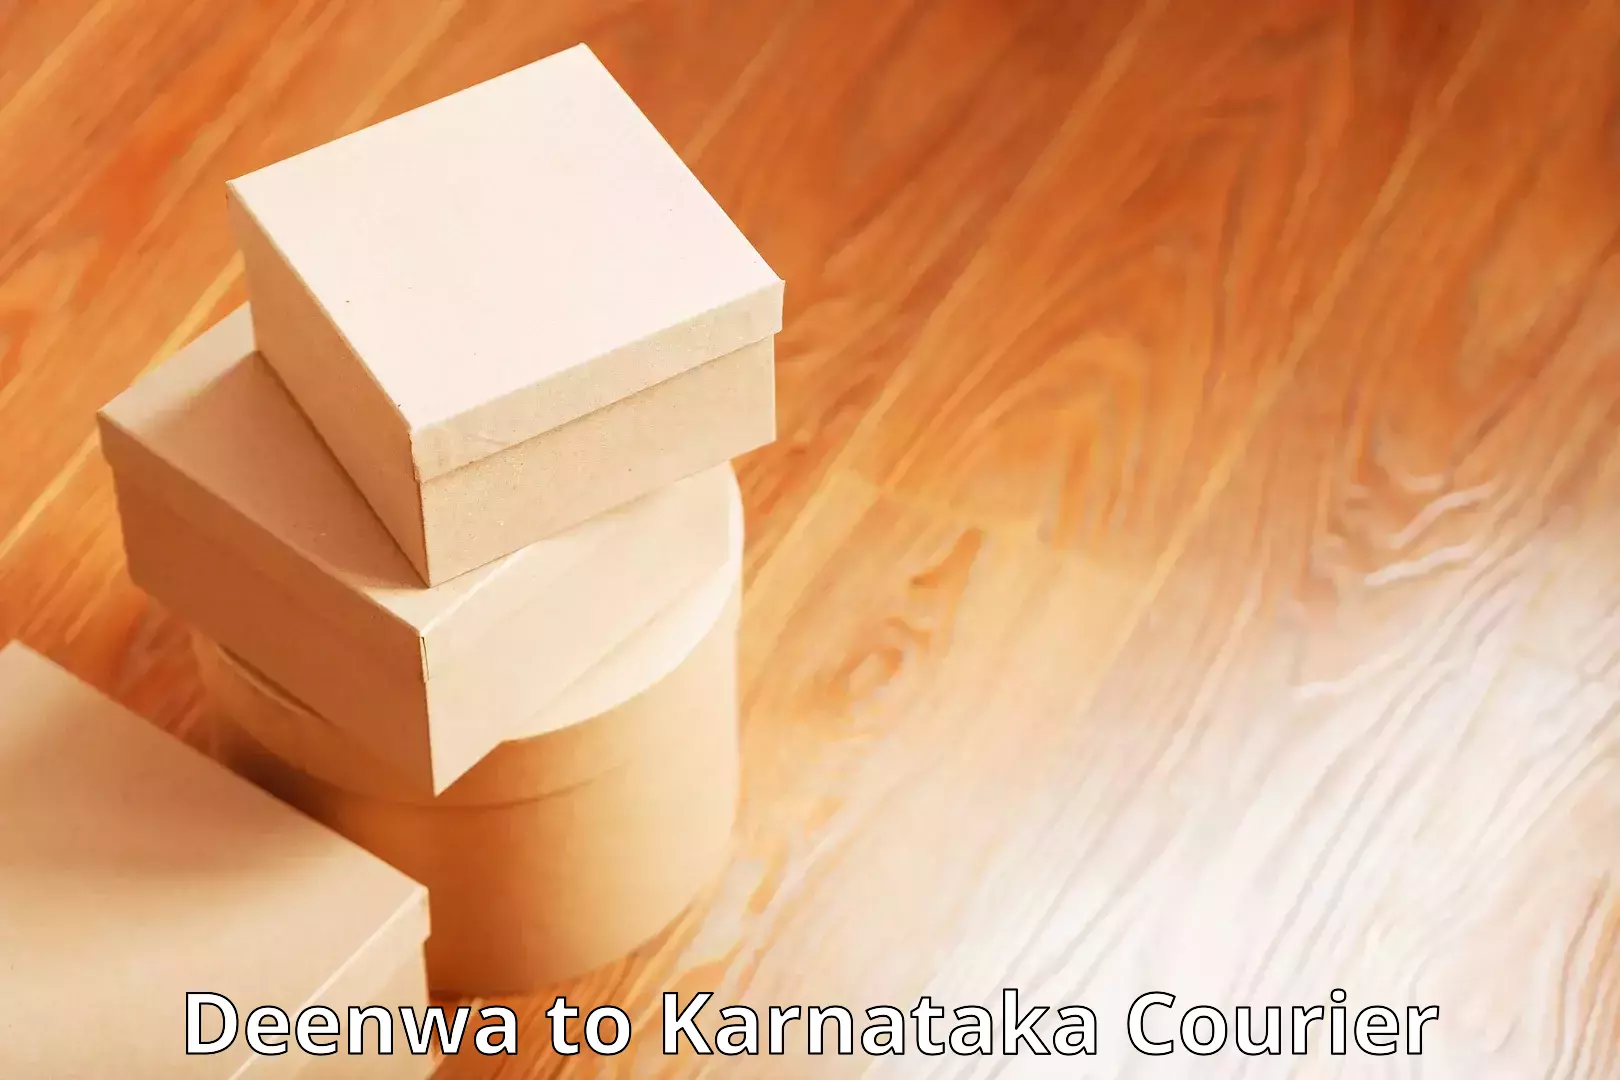 Next-day delivery options Deenwa to Nelamangala